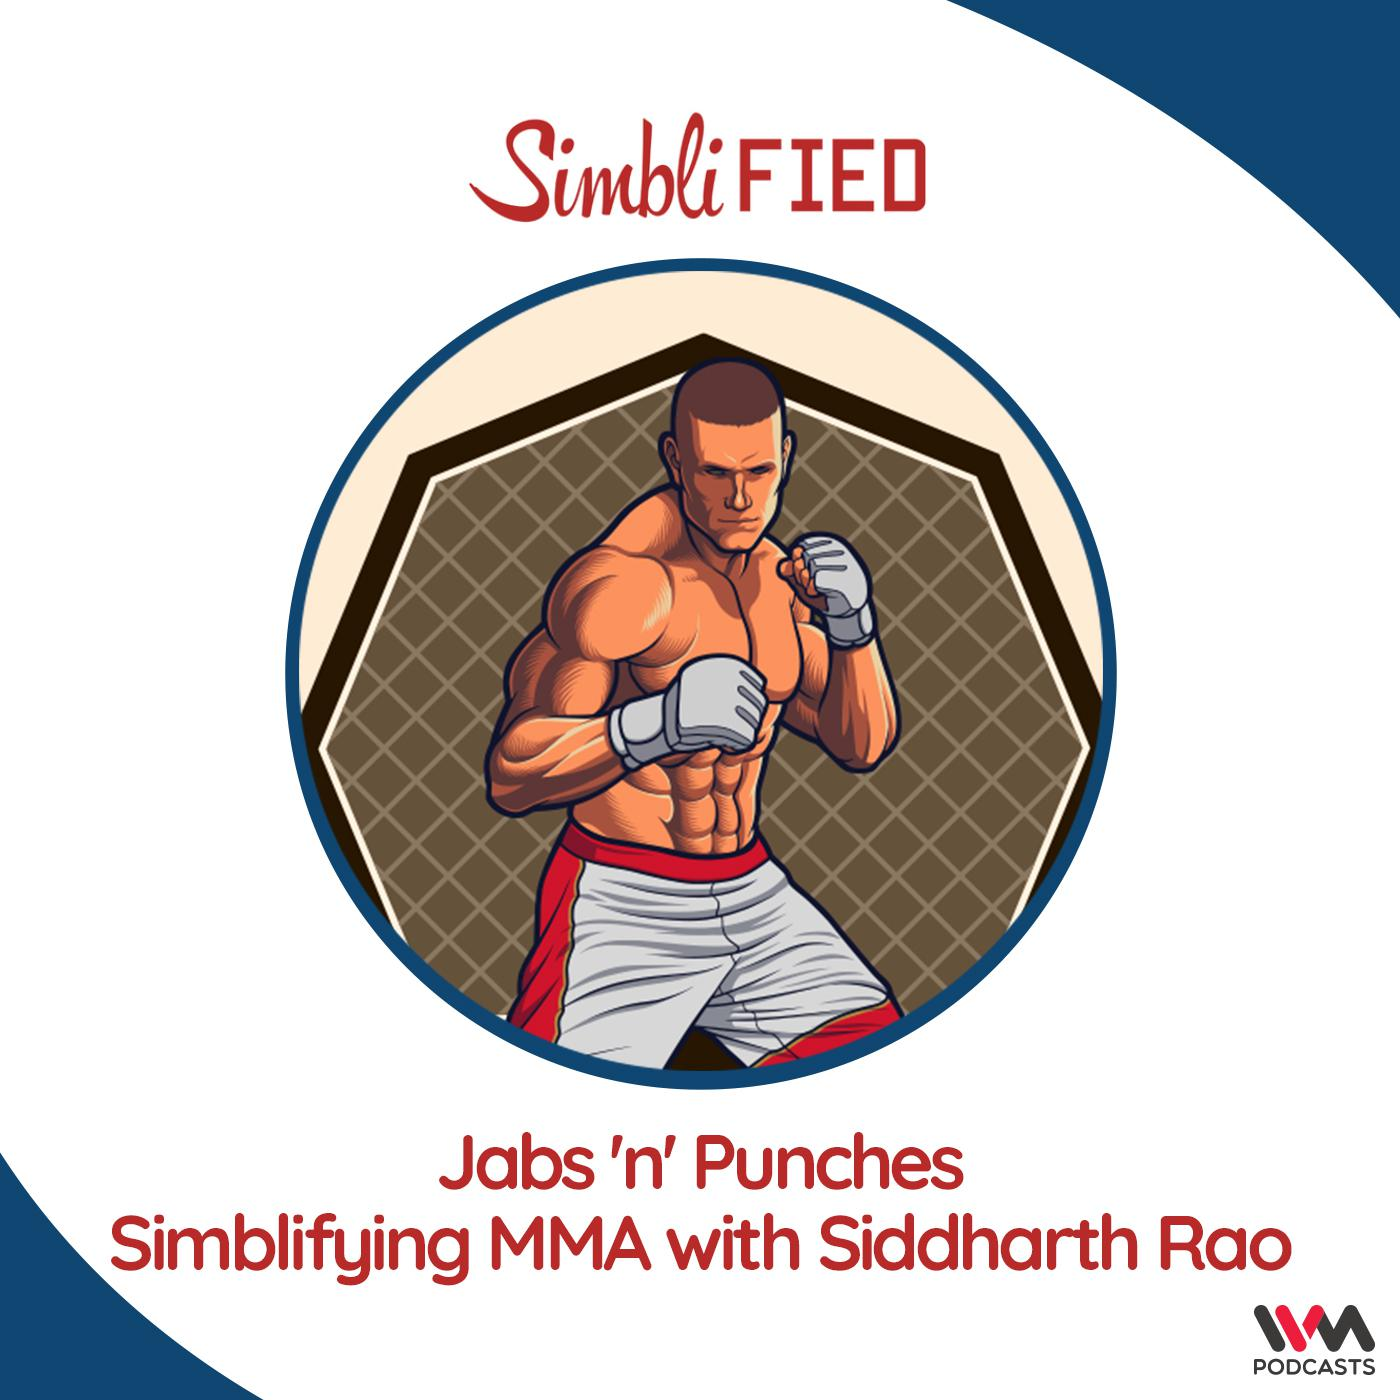 Jabs ’n’ Punches: Simblifying MMA with Siddharth Rao